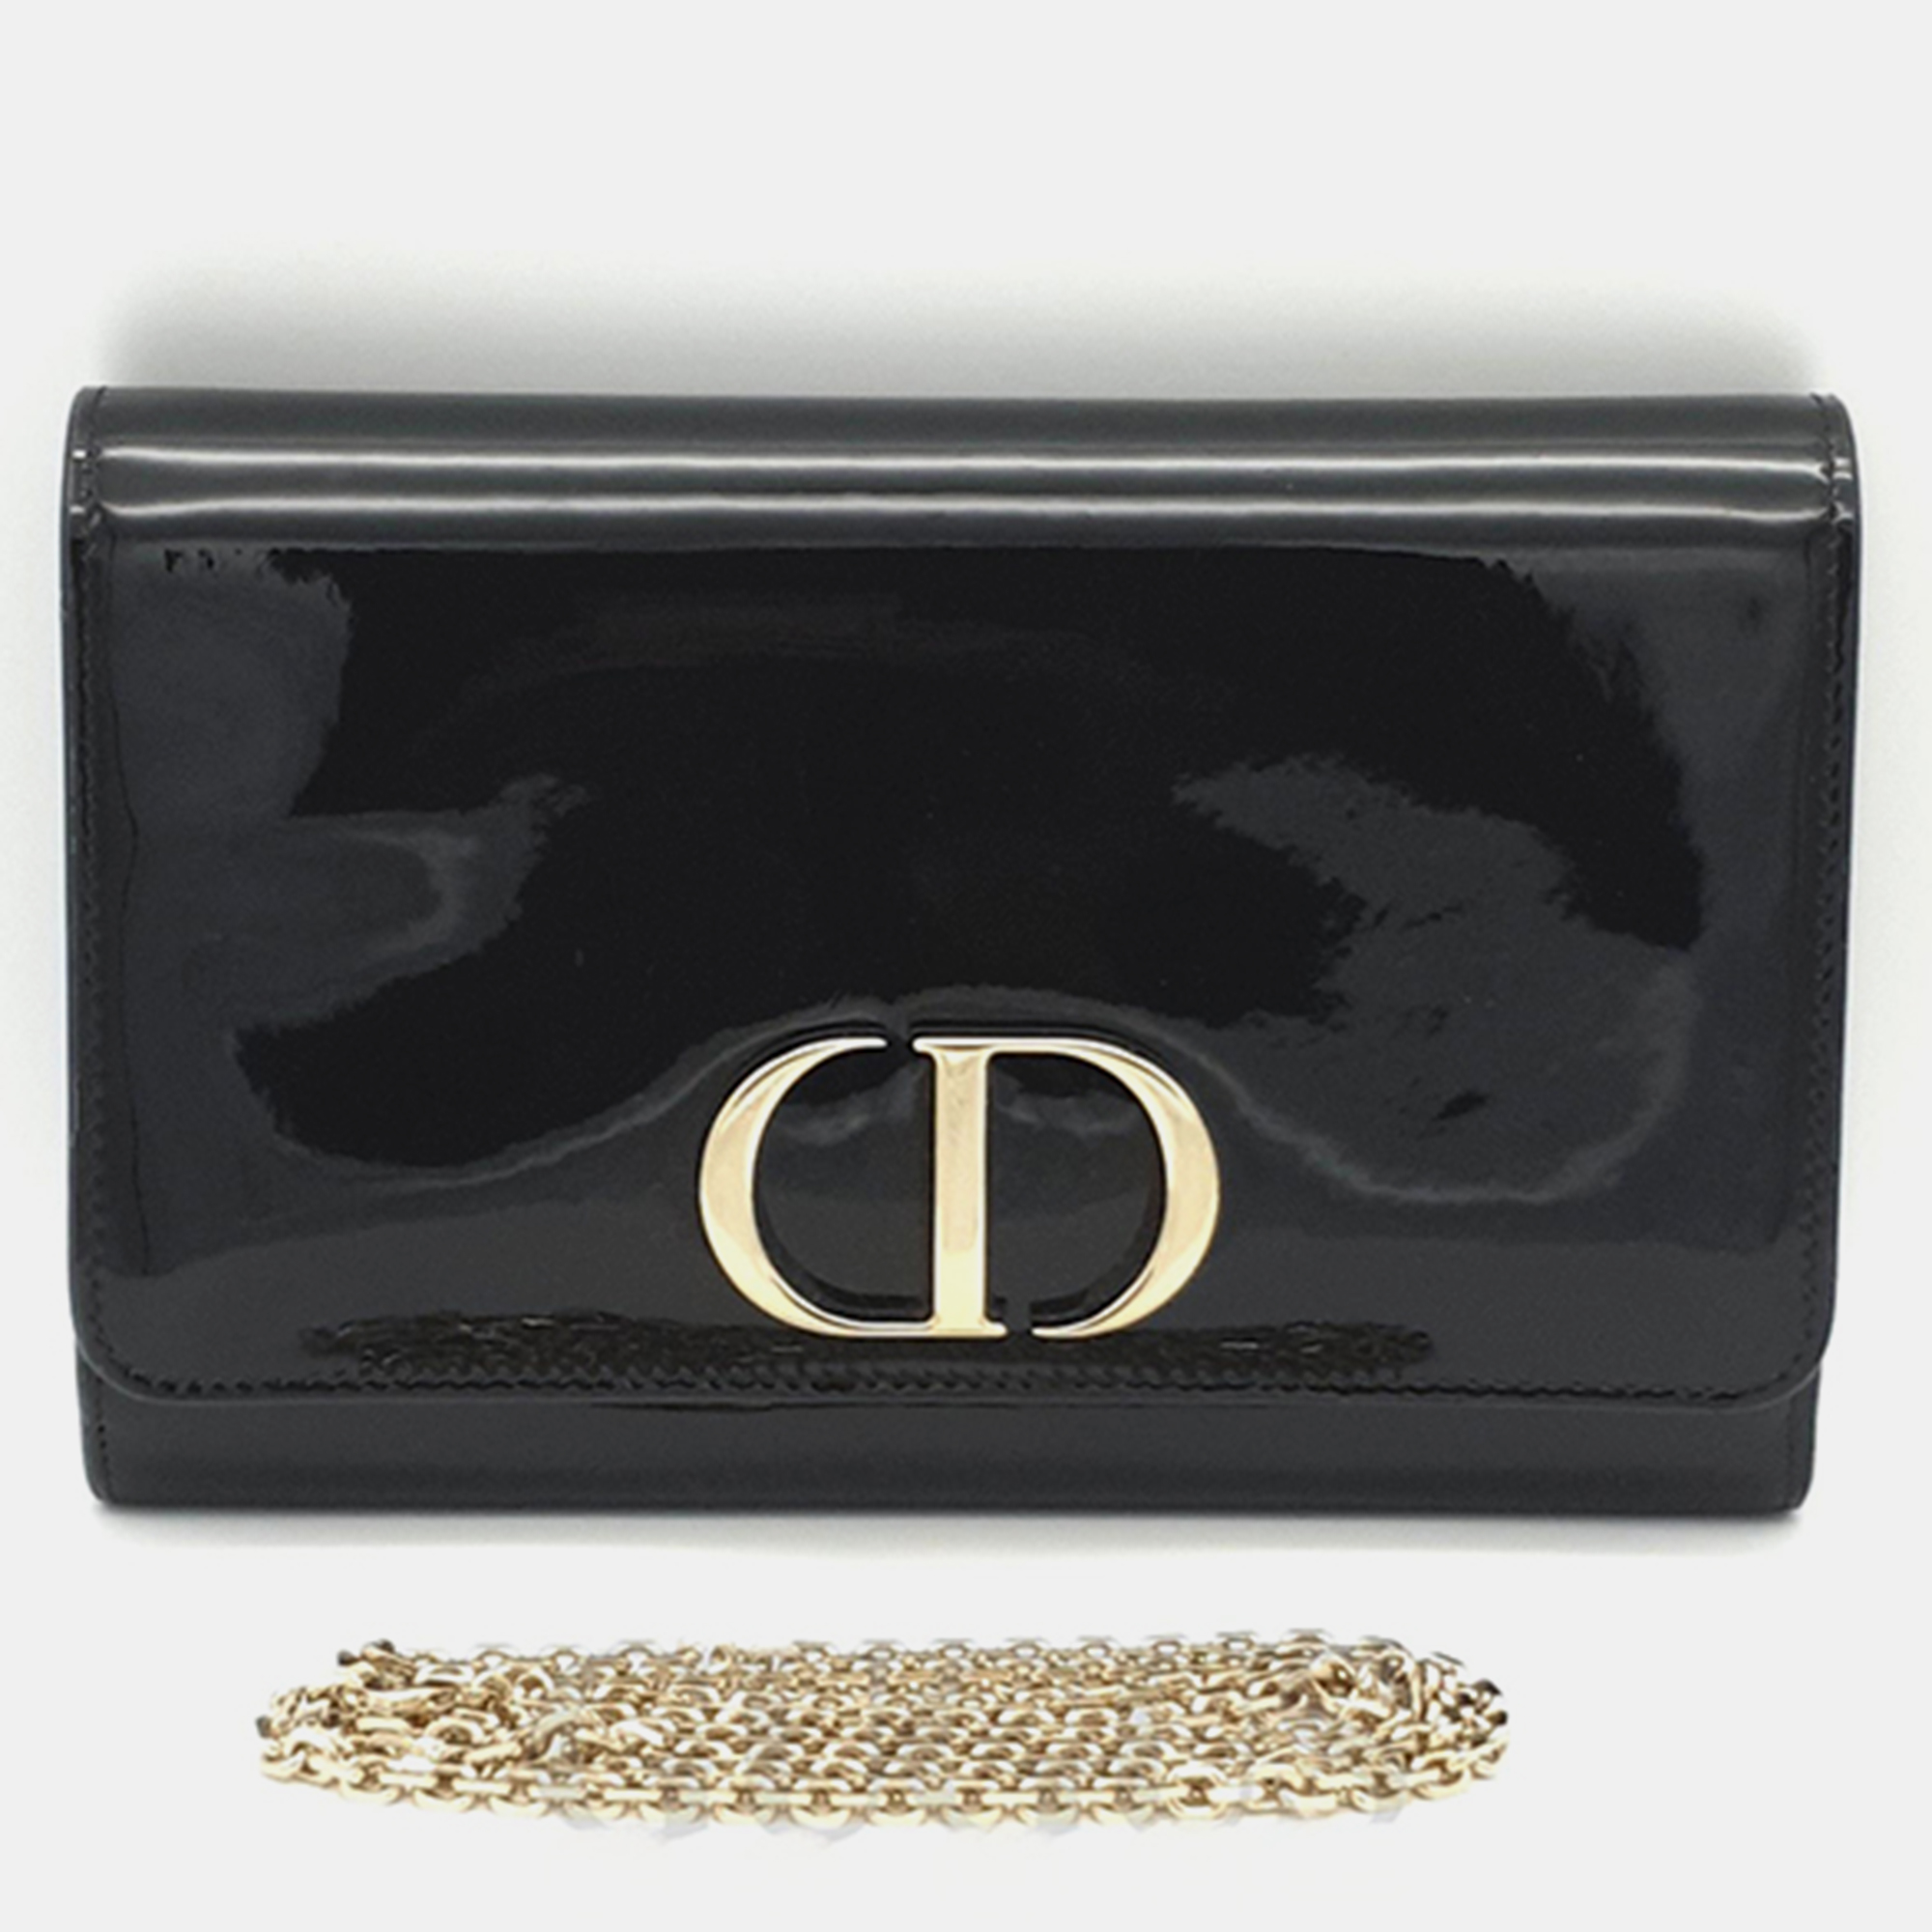 Christian Dior patent clutch and cross bag